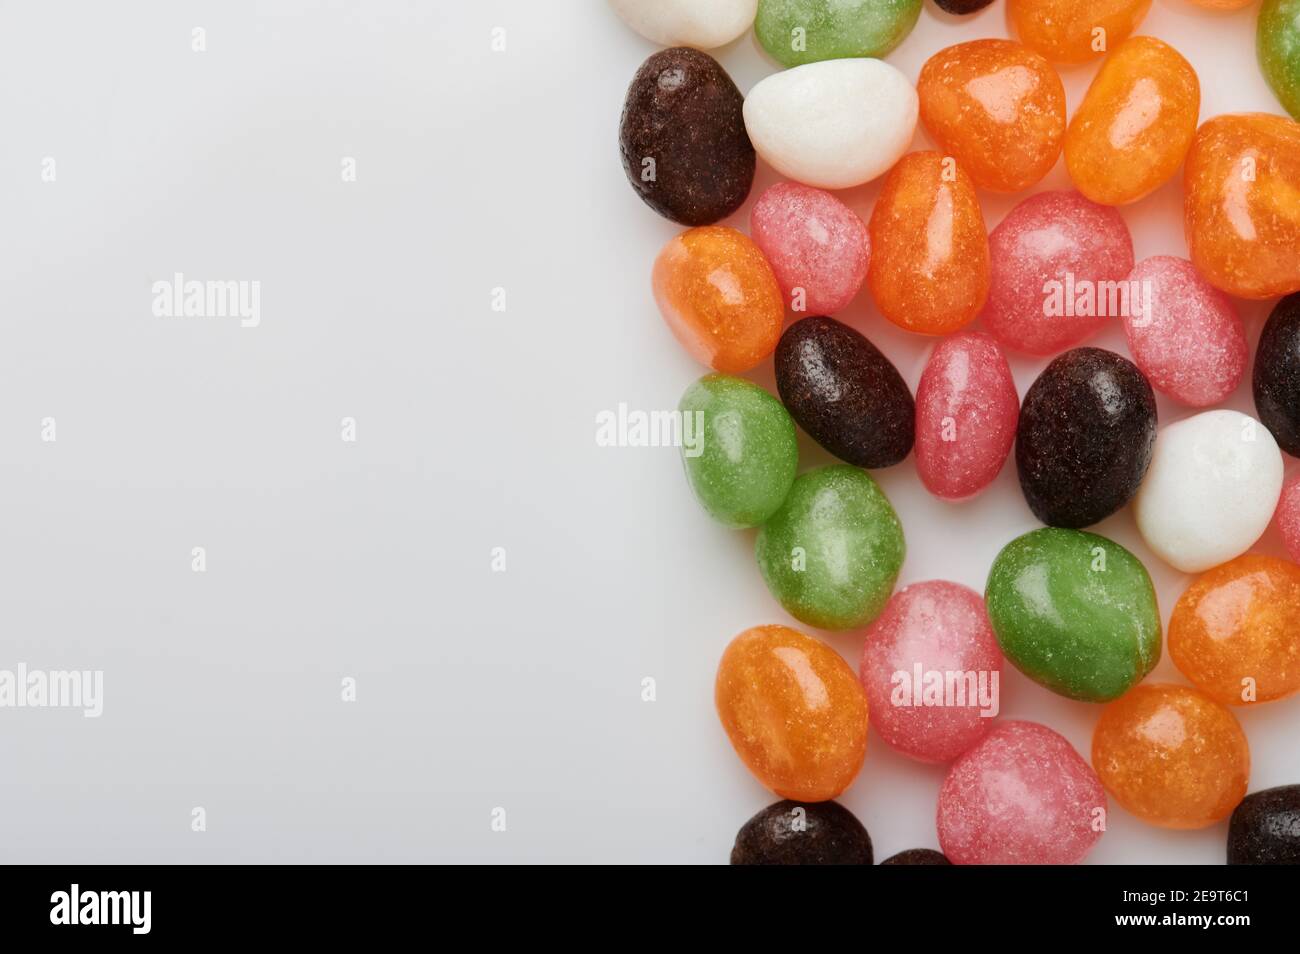 Round colorful candies background macro close up view Stock Photo